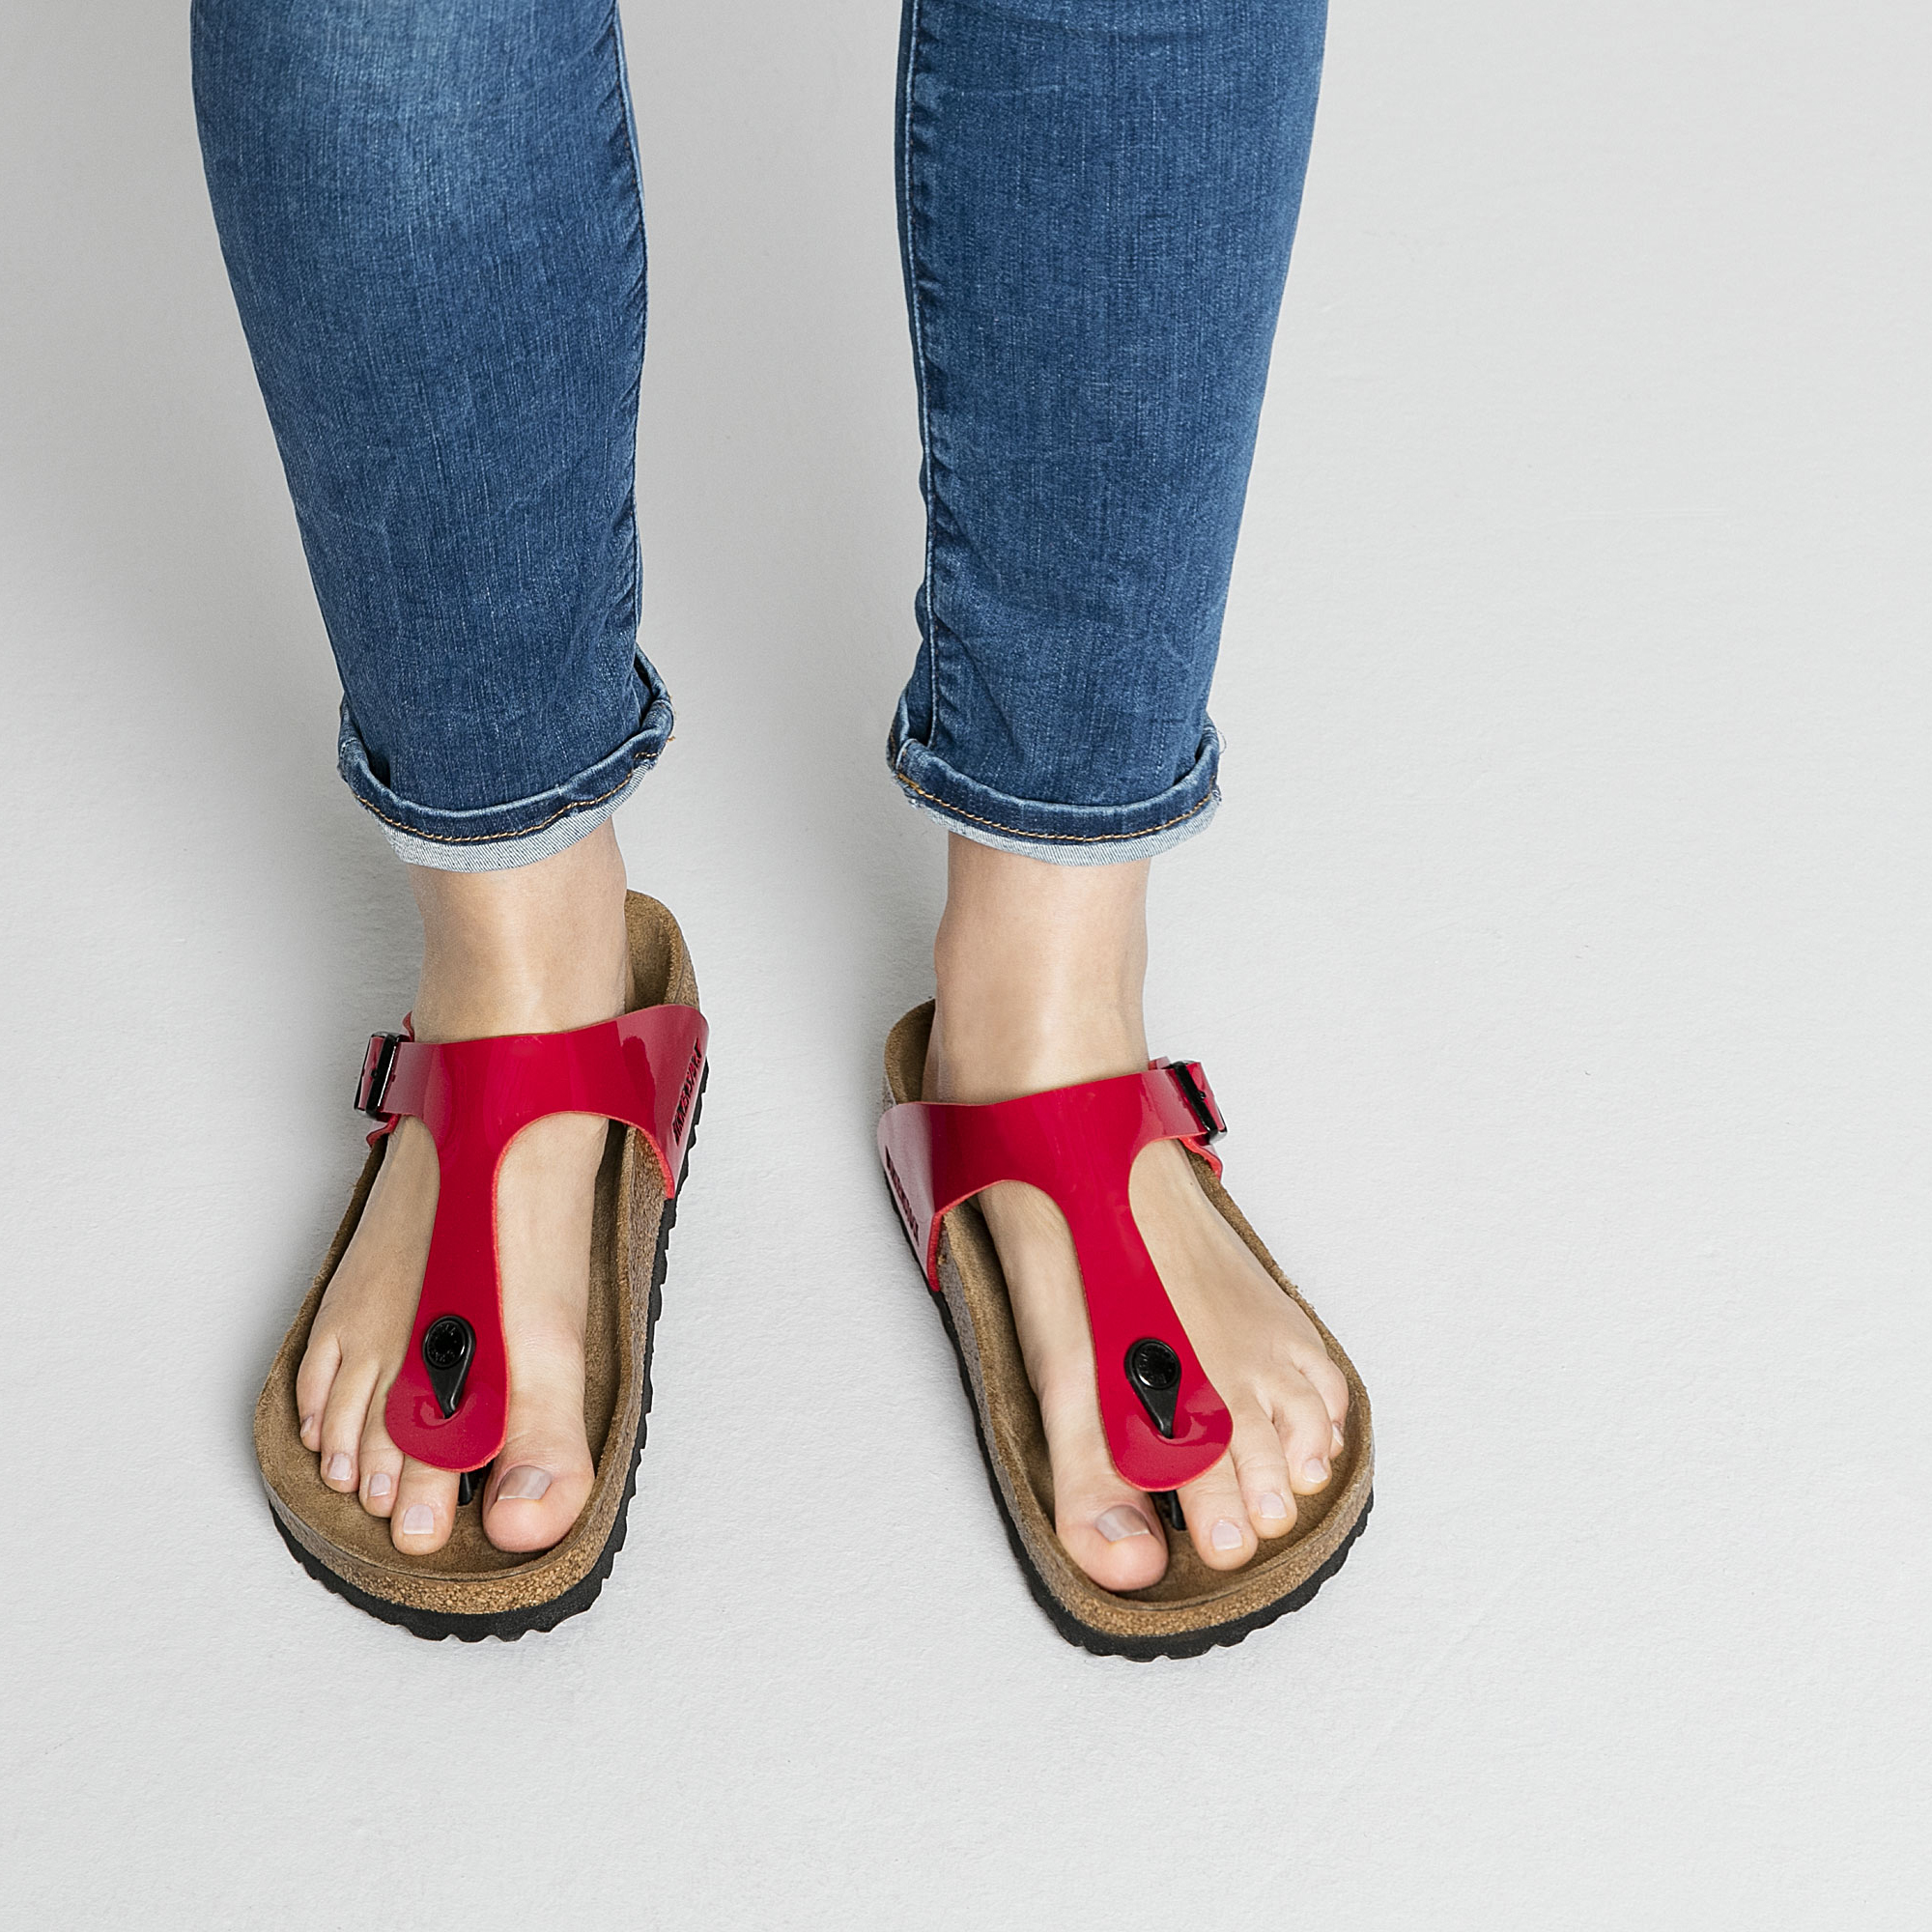 birkenstock gizeh red patent leather